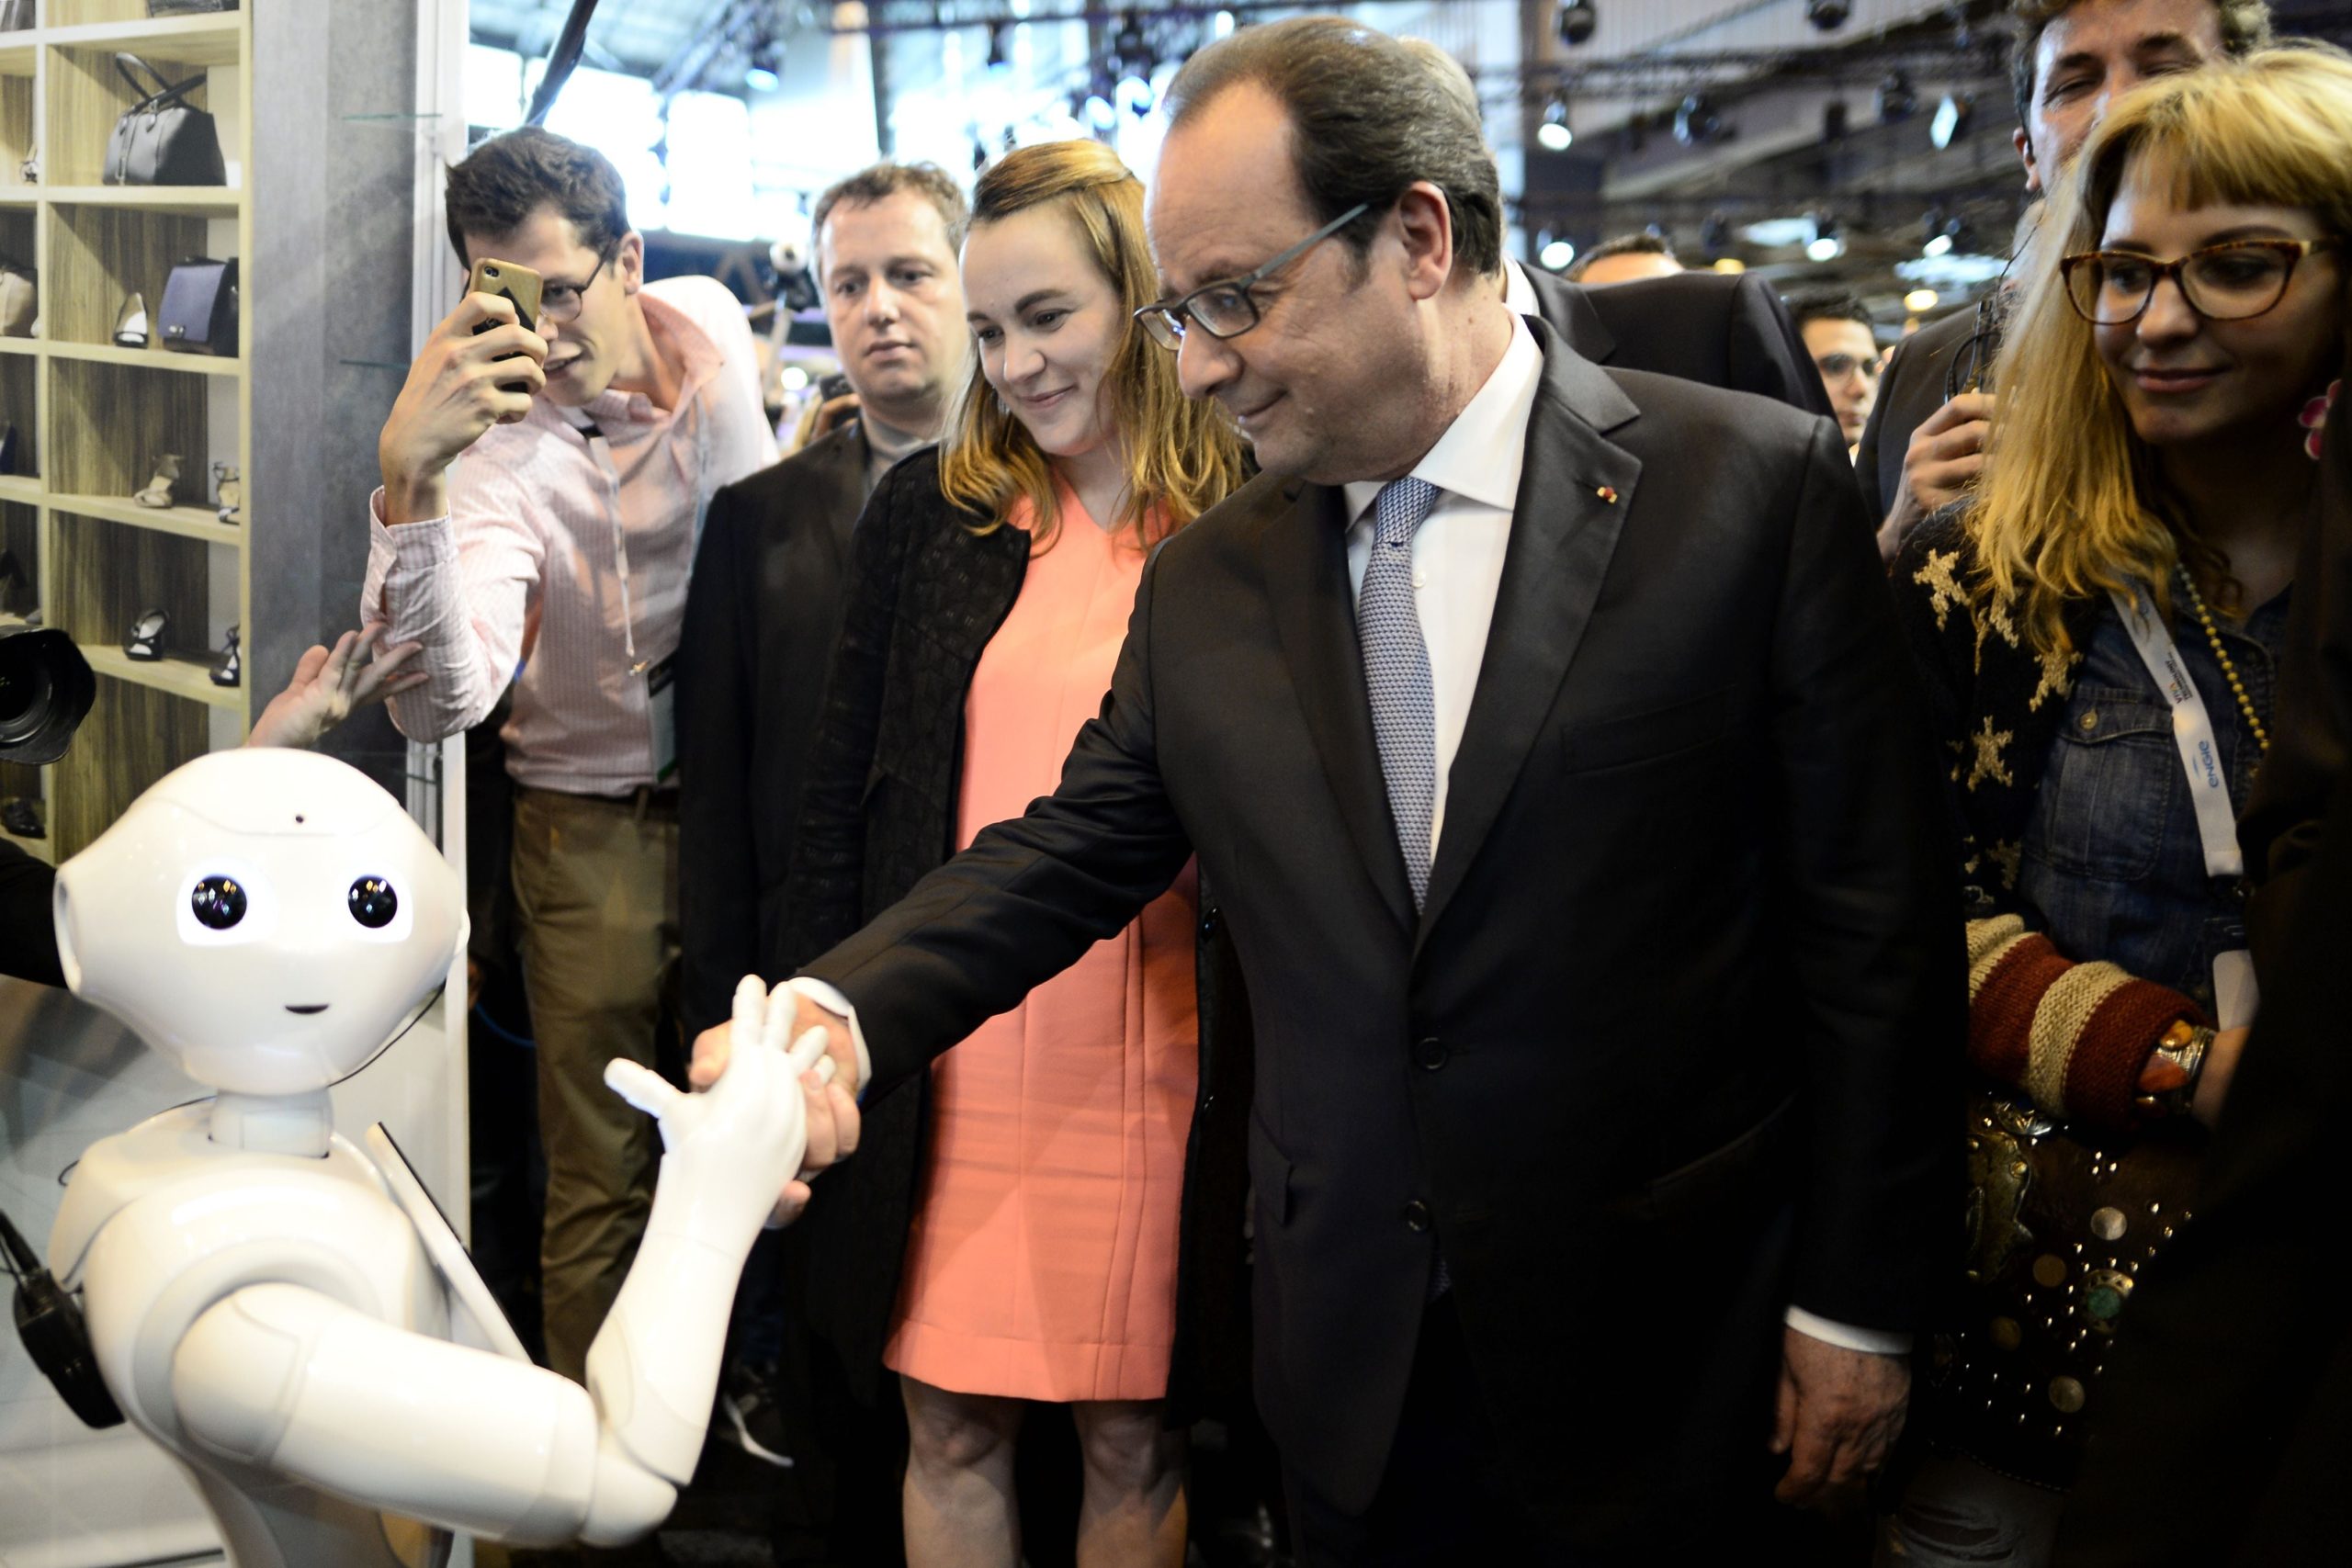 French President Francois Hollande shakes hands with Pepper during his visit to the Viva technology event in Paris on June 30, 2016. (Photo: Stephane De Sakutin/AFP, Getty Images)